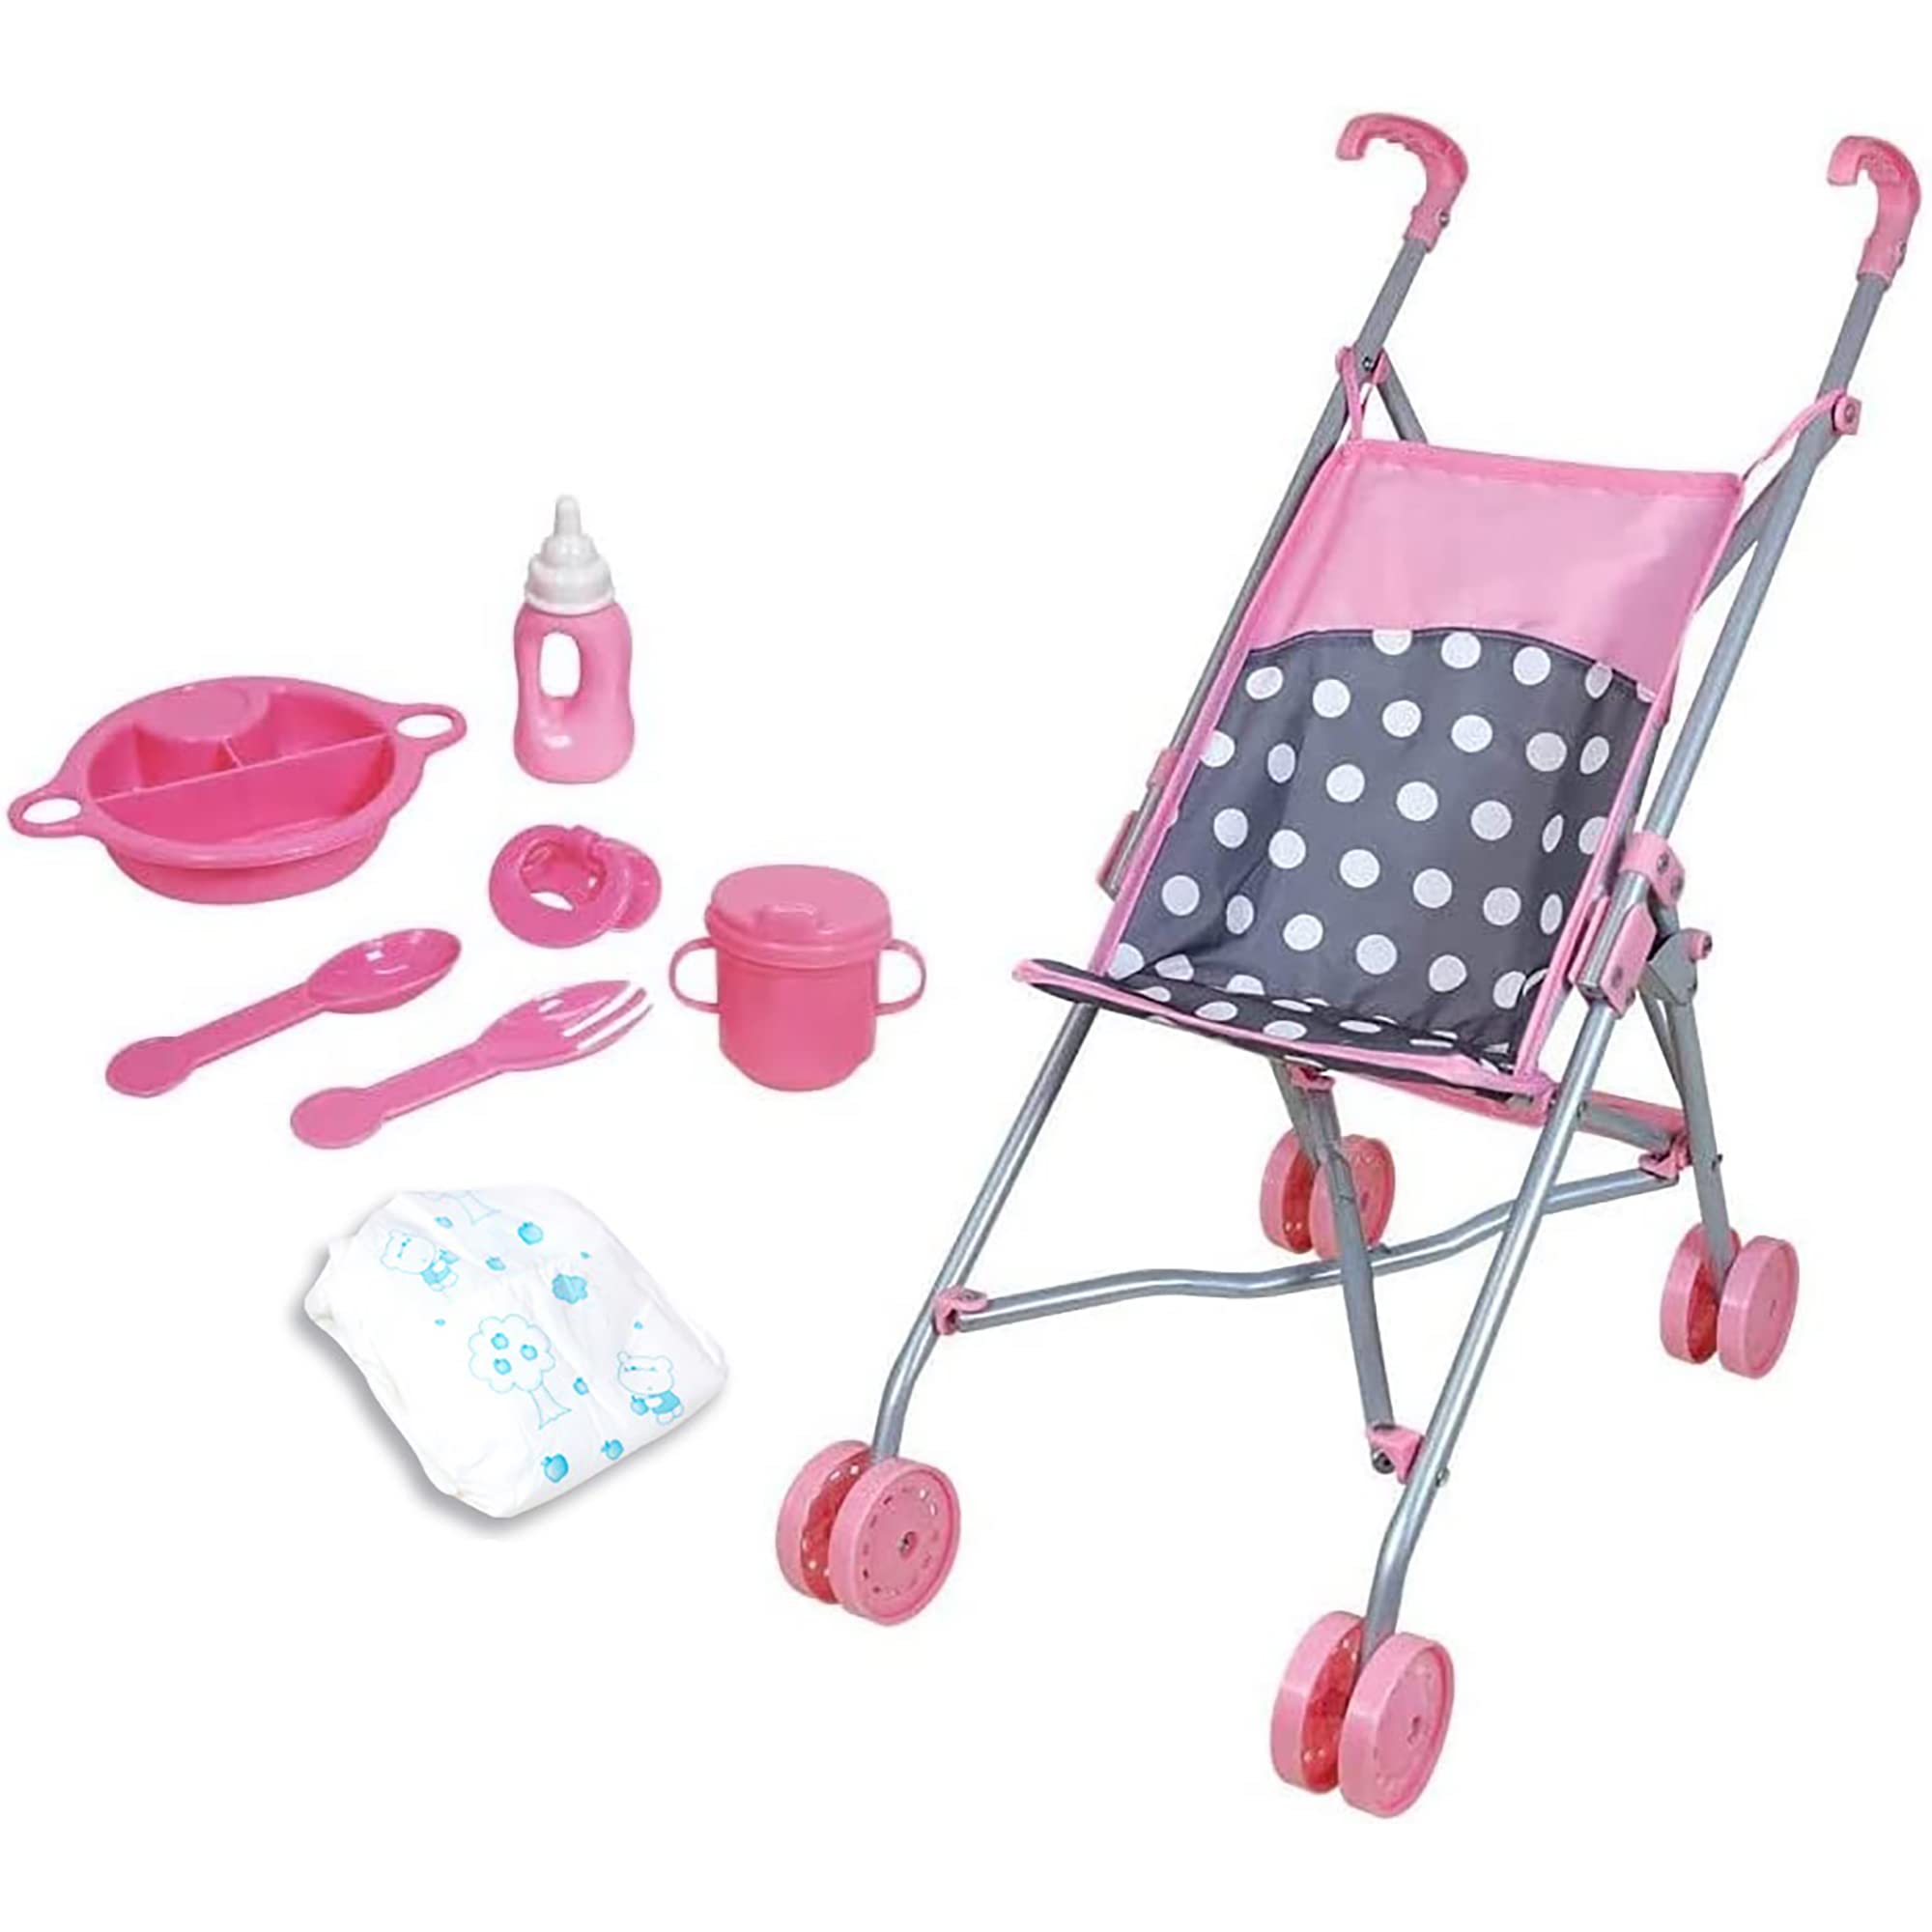 Lissi 5 Piece Doll Deluxe Nursery Play Set with Accessories